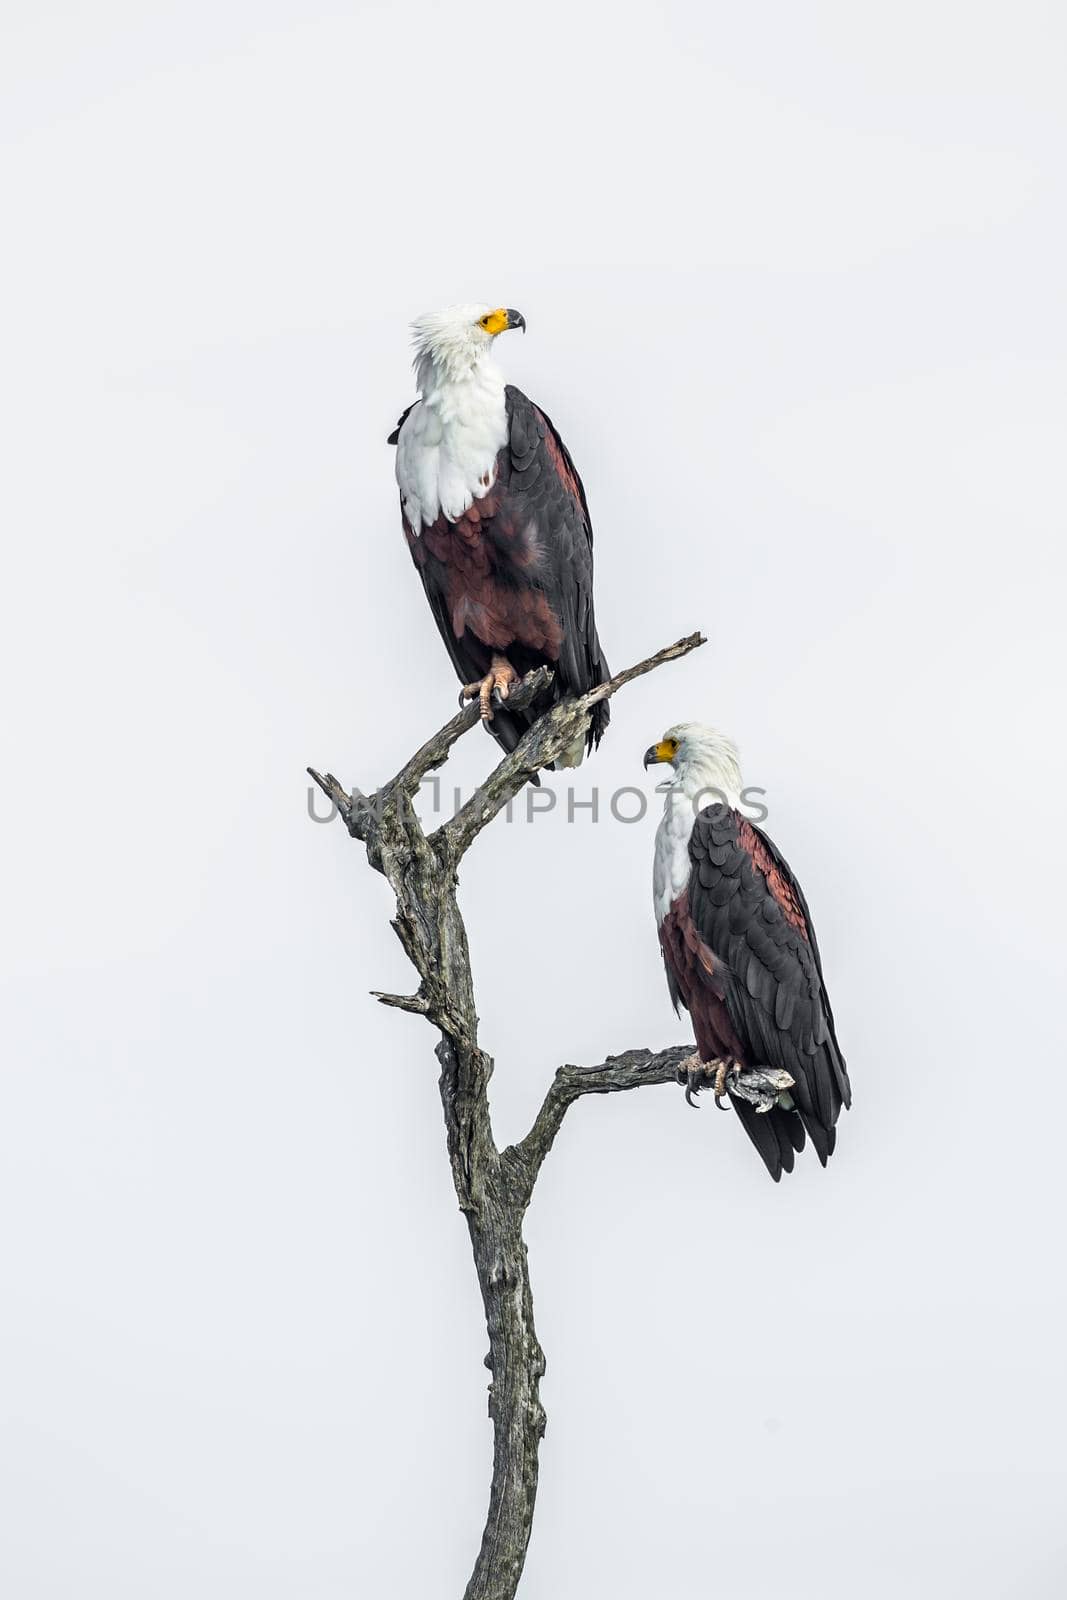 African fish eagle couple isolated in white background in Kruger National park, South Africa ; Specie Haliaeetus vocifer family of Accipitridae